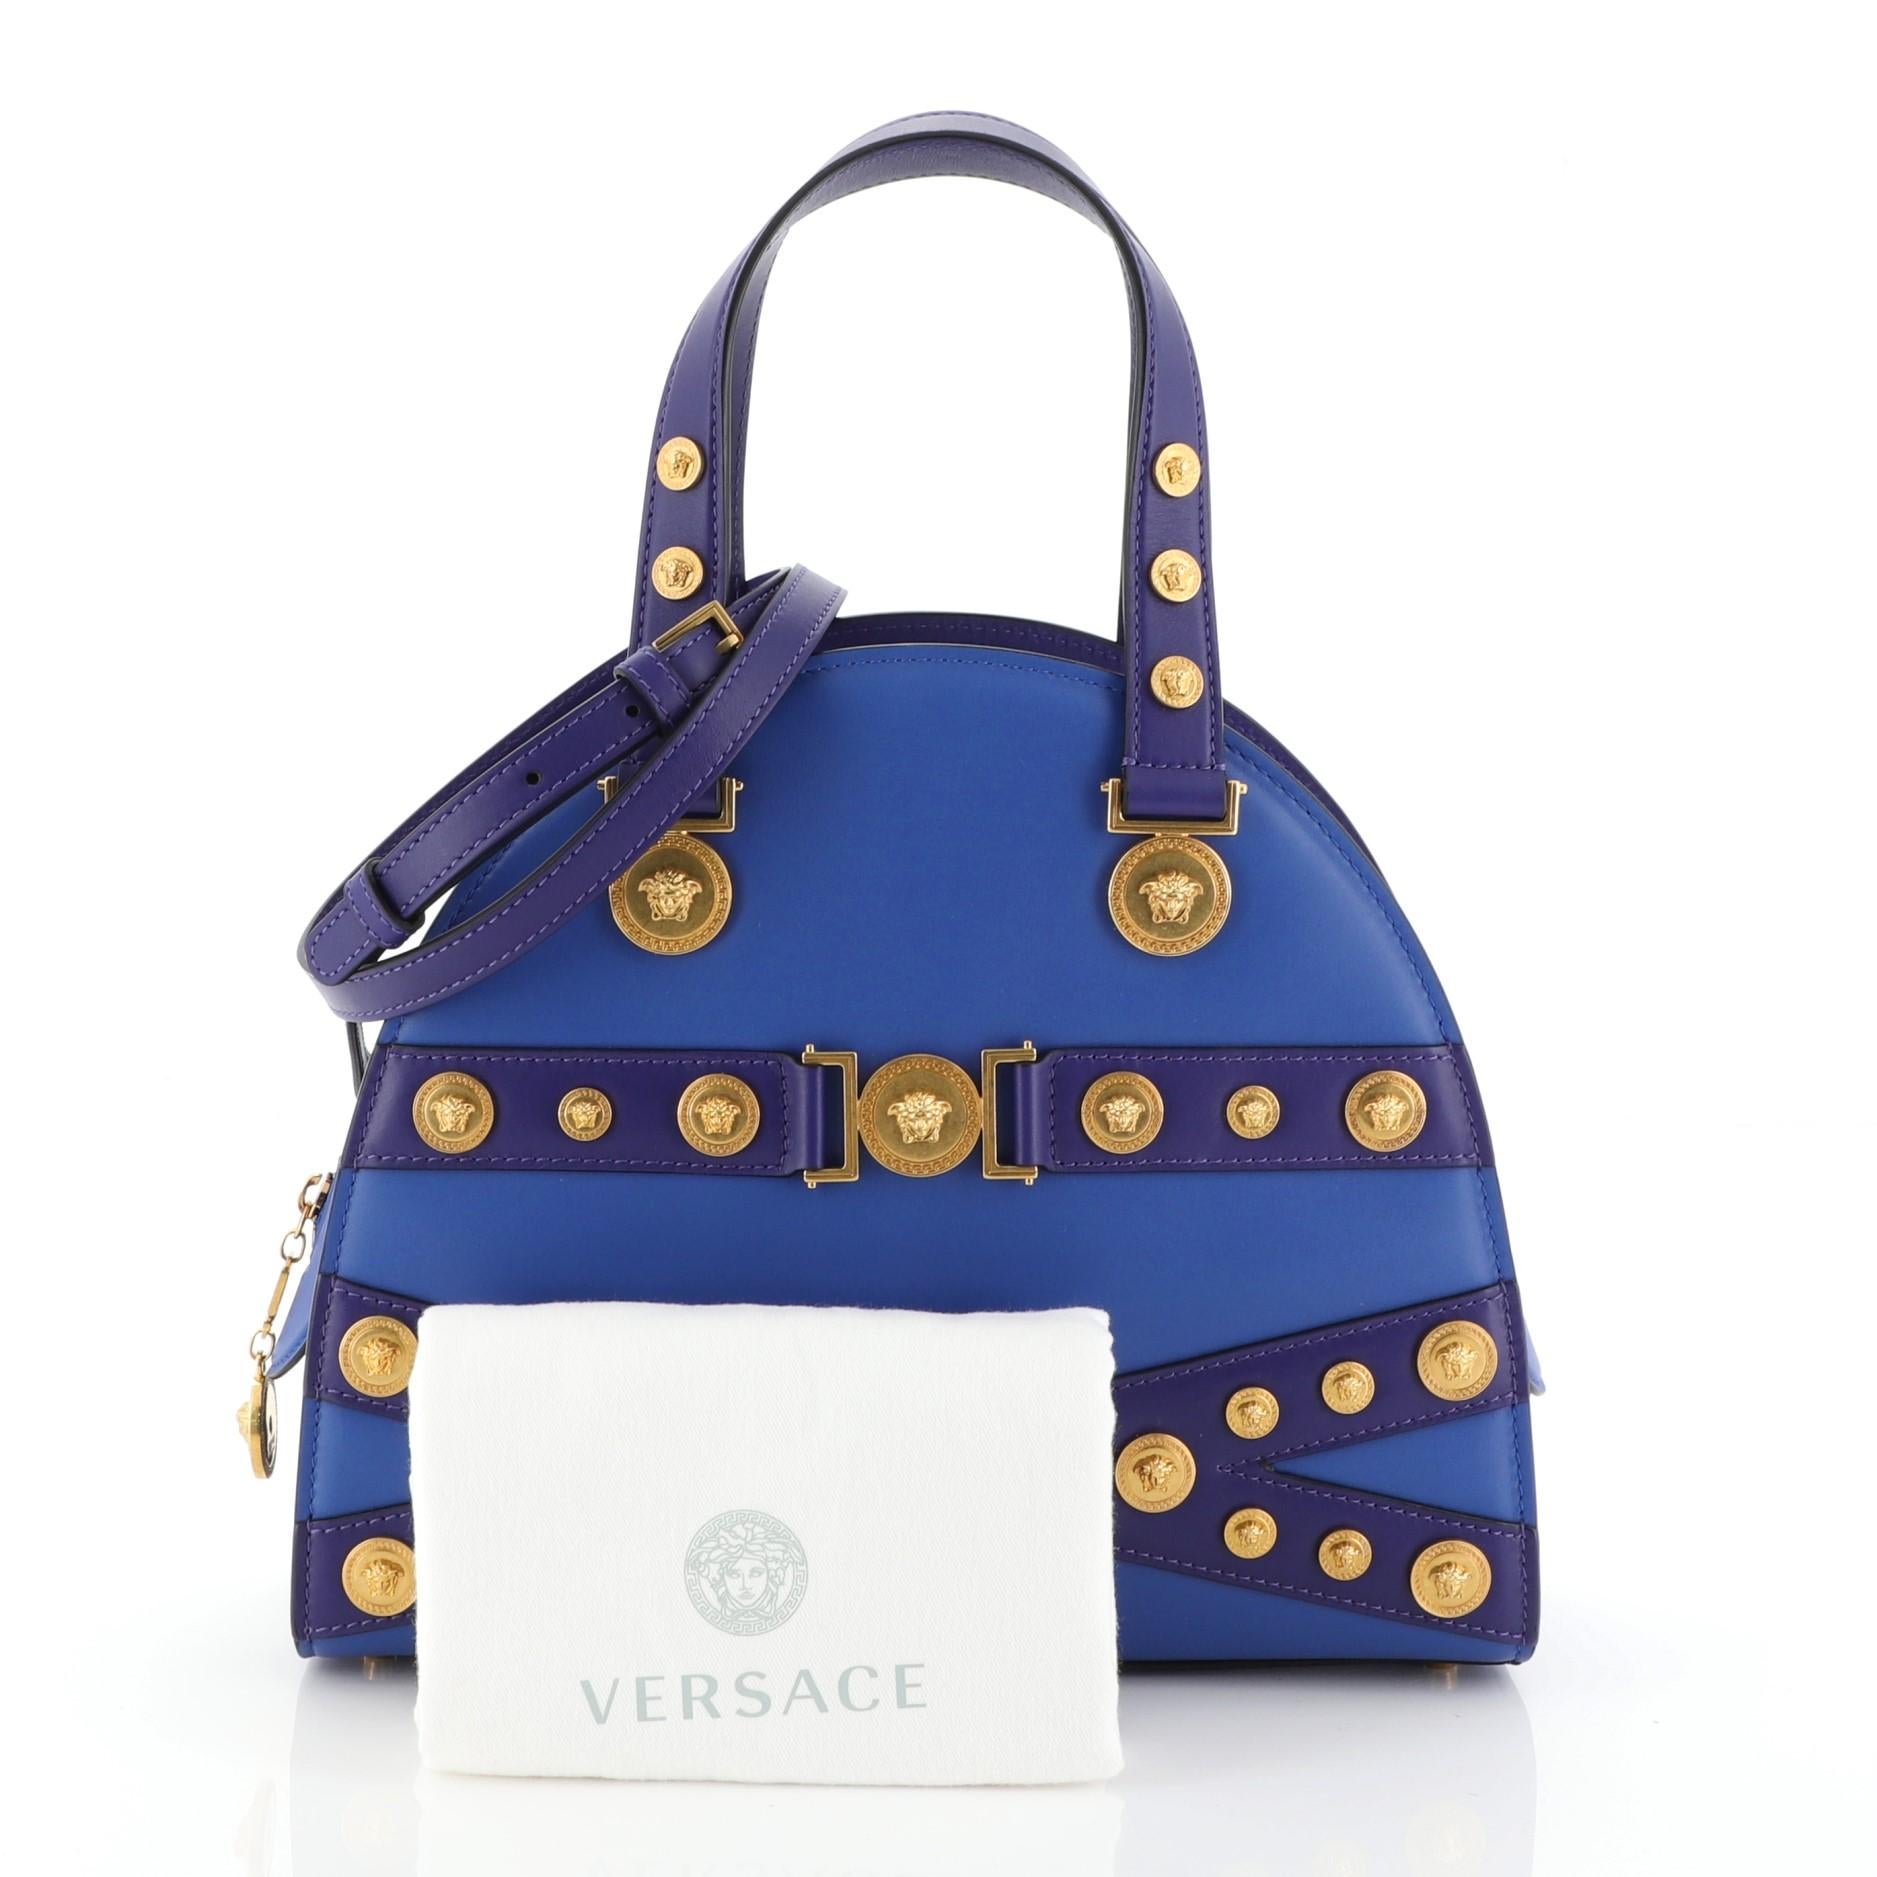 This Versace Tribute Medallion Bowling Bag Leather Medium, crafted from blue leather, features dual leather handles, medallion accents, and gold-tone hardware. Its zip closure opens to a blue leather interior. 

Condition: Excellent. Light scuffs